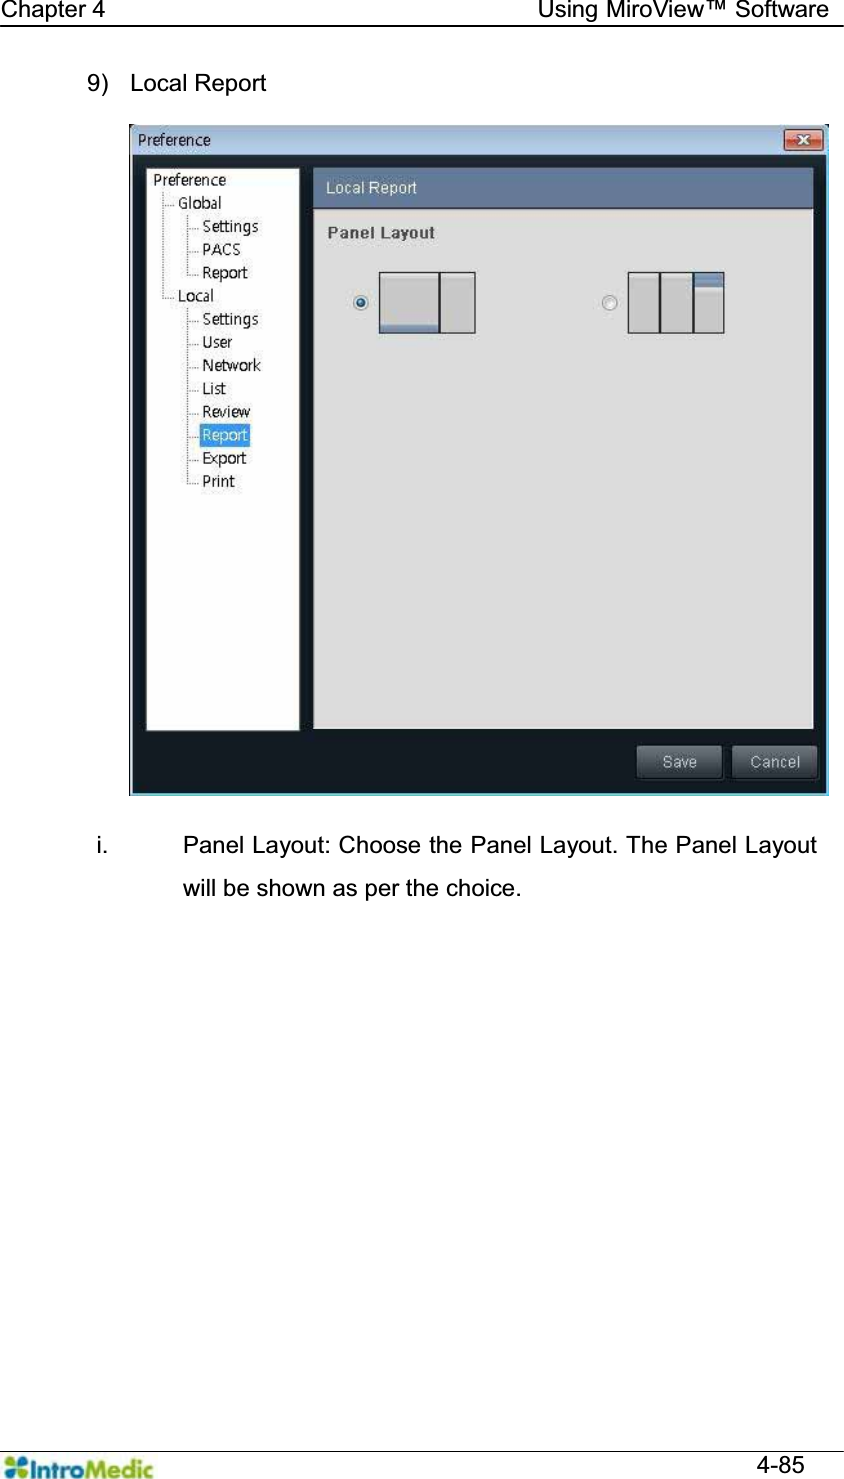   Chapter 4                                    Using 0LUR9LHZ Software  4-85 9) Local Report                                                                  i.  Panel Layout: Choose the Panel Layout. The Panel Layout will be shown as per the choice. 